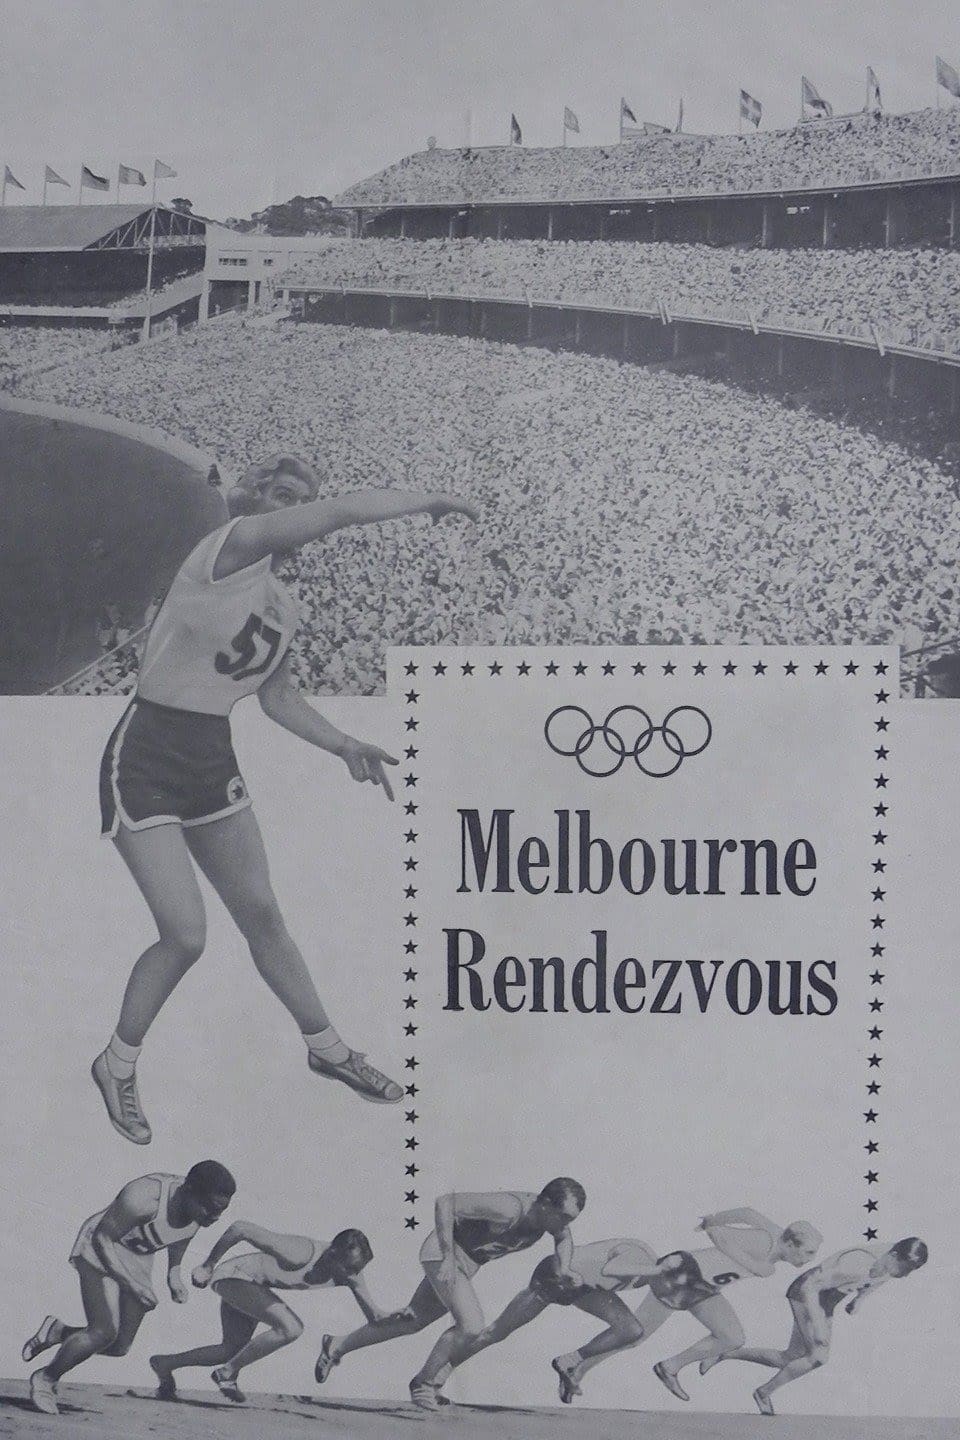 The Melbourne Rendezvous